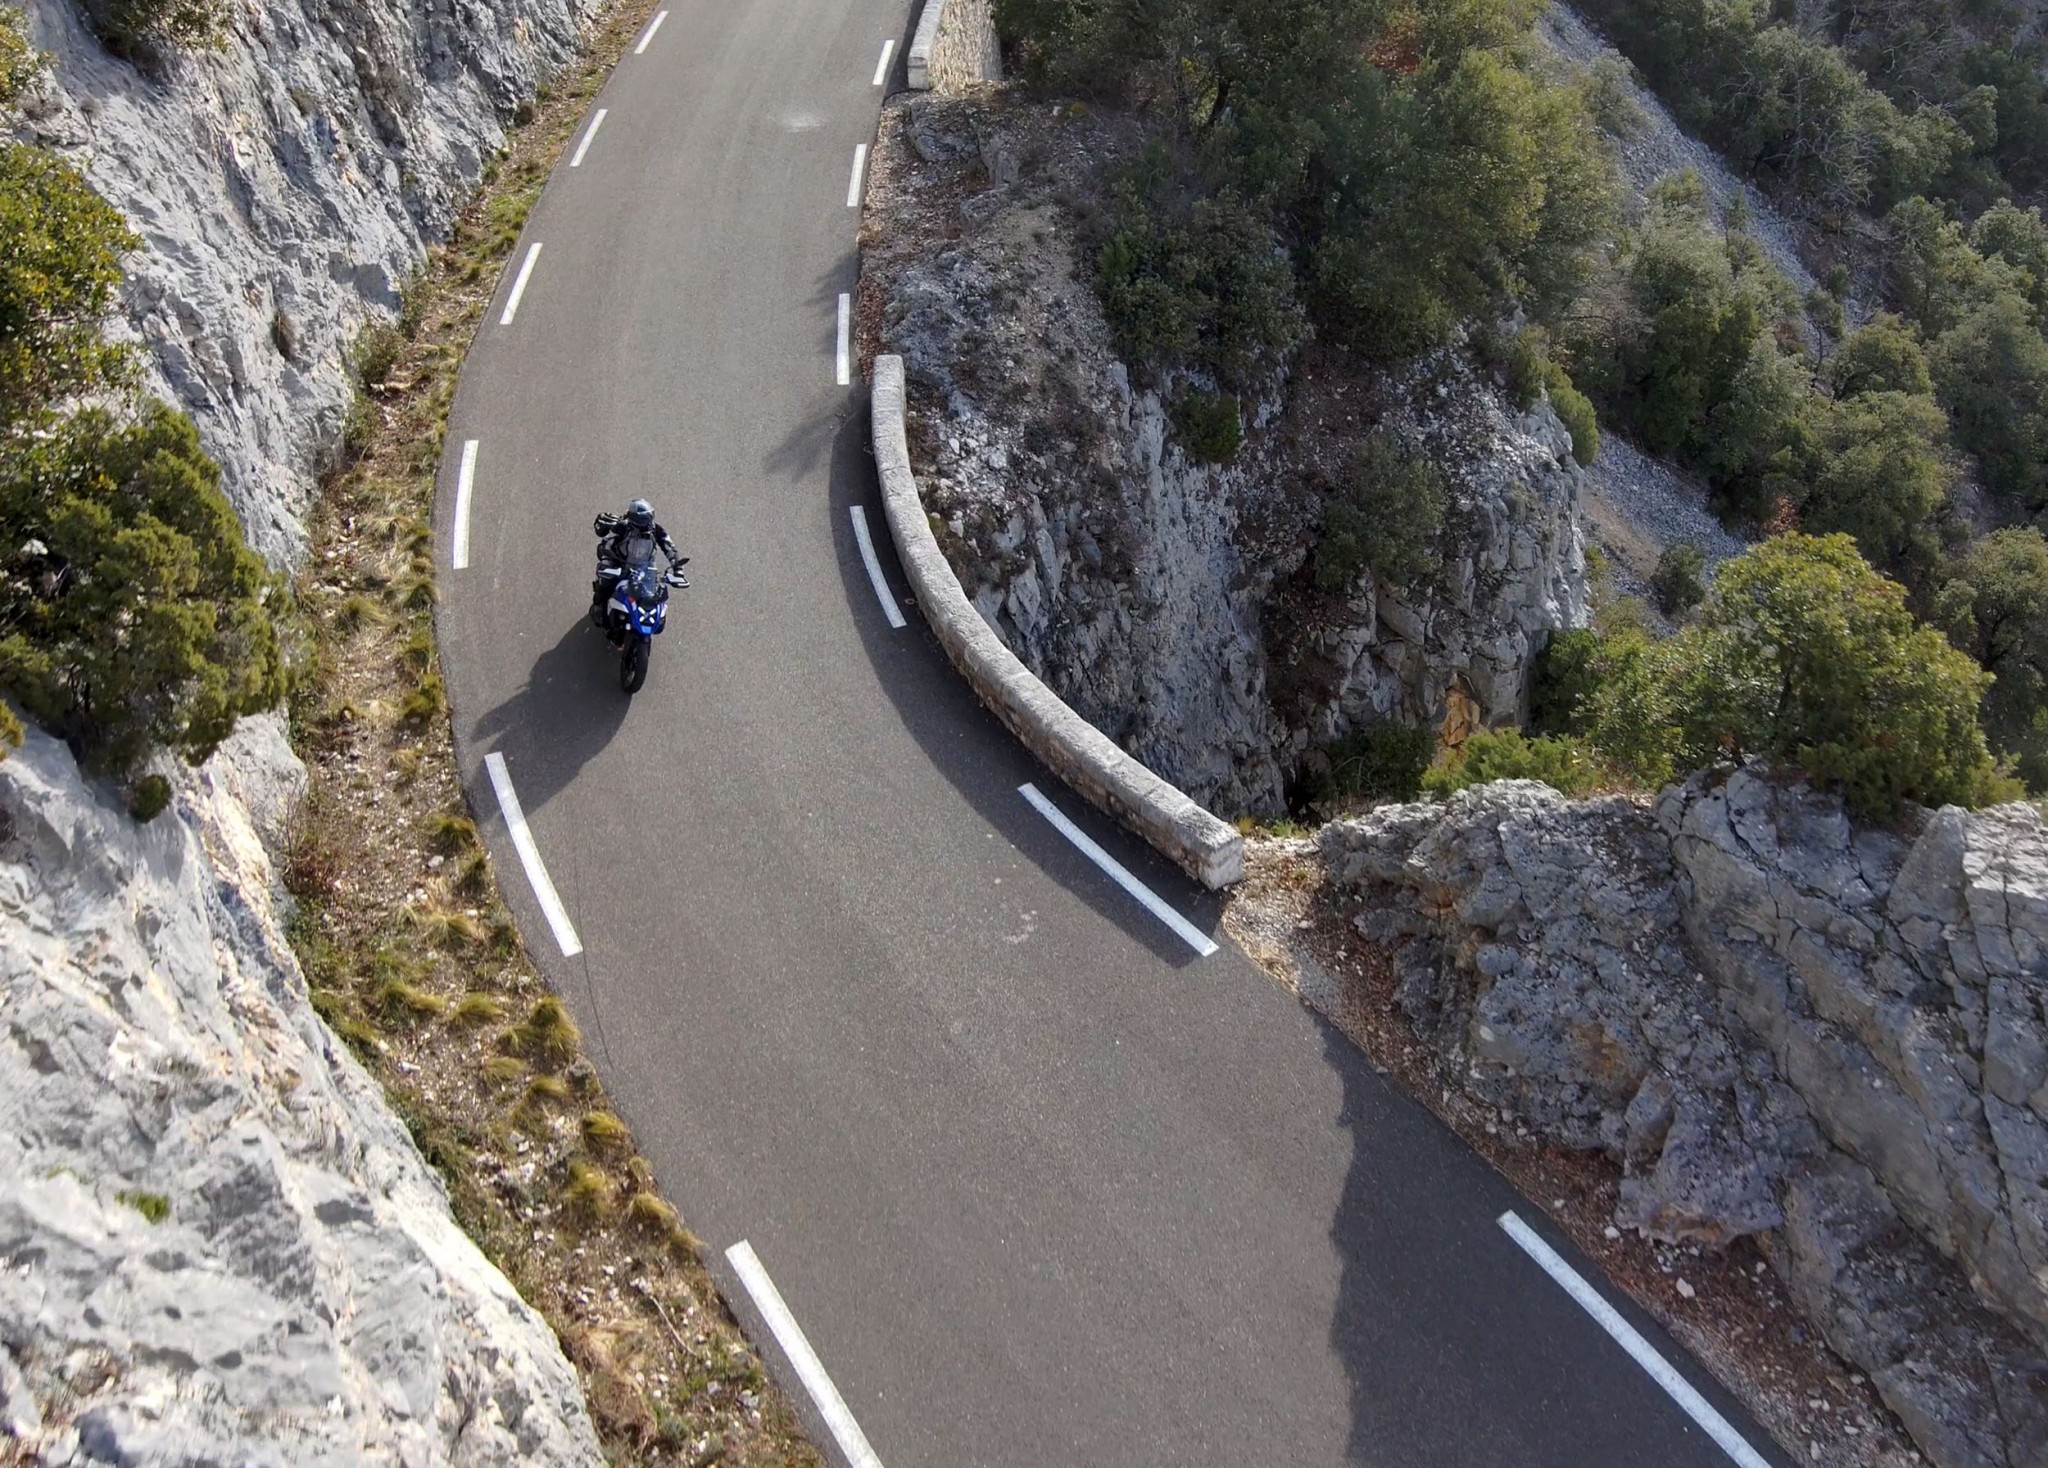 BMW R 1300 GS road test - from Barcelona to Vienna - Image 32